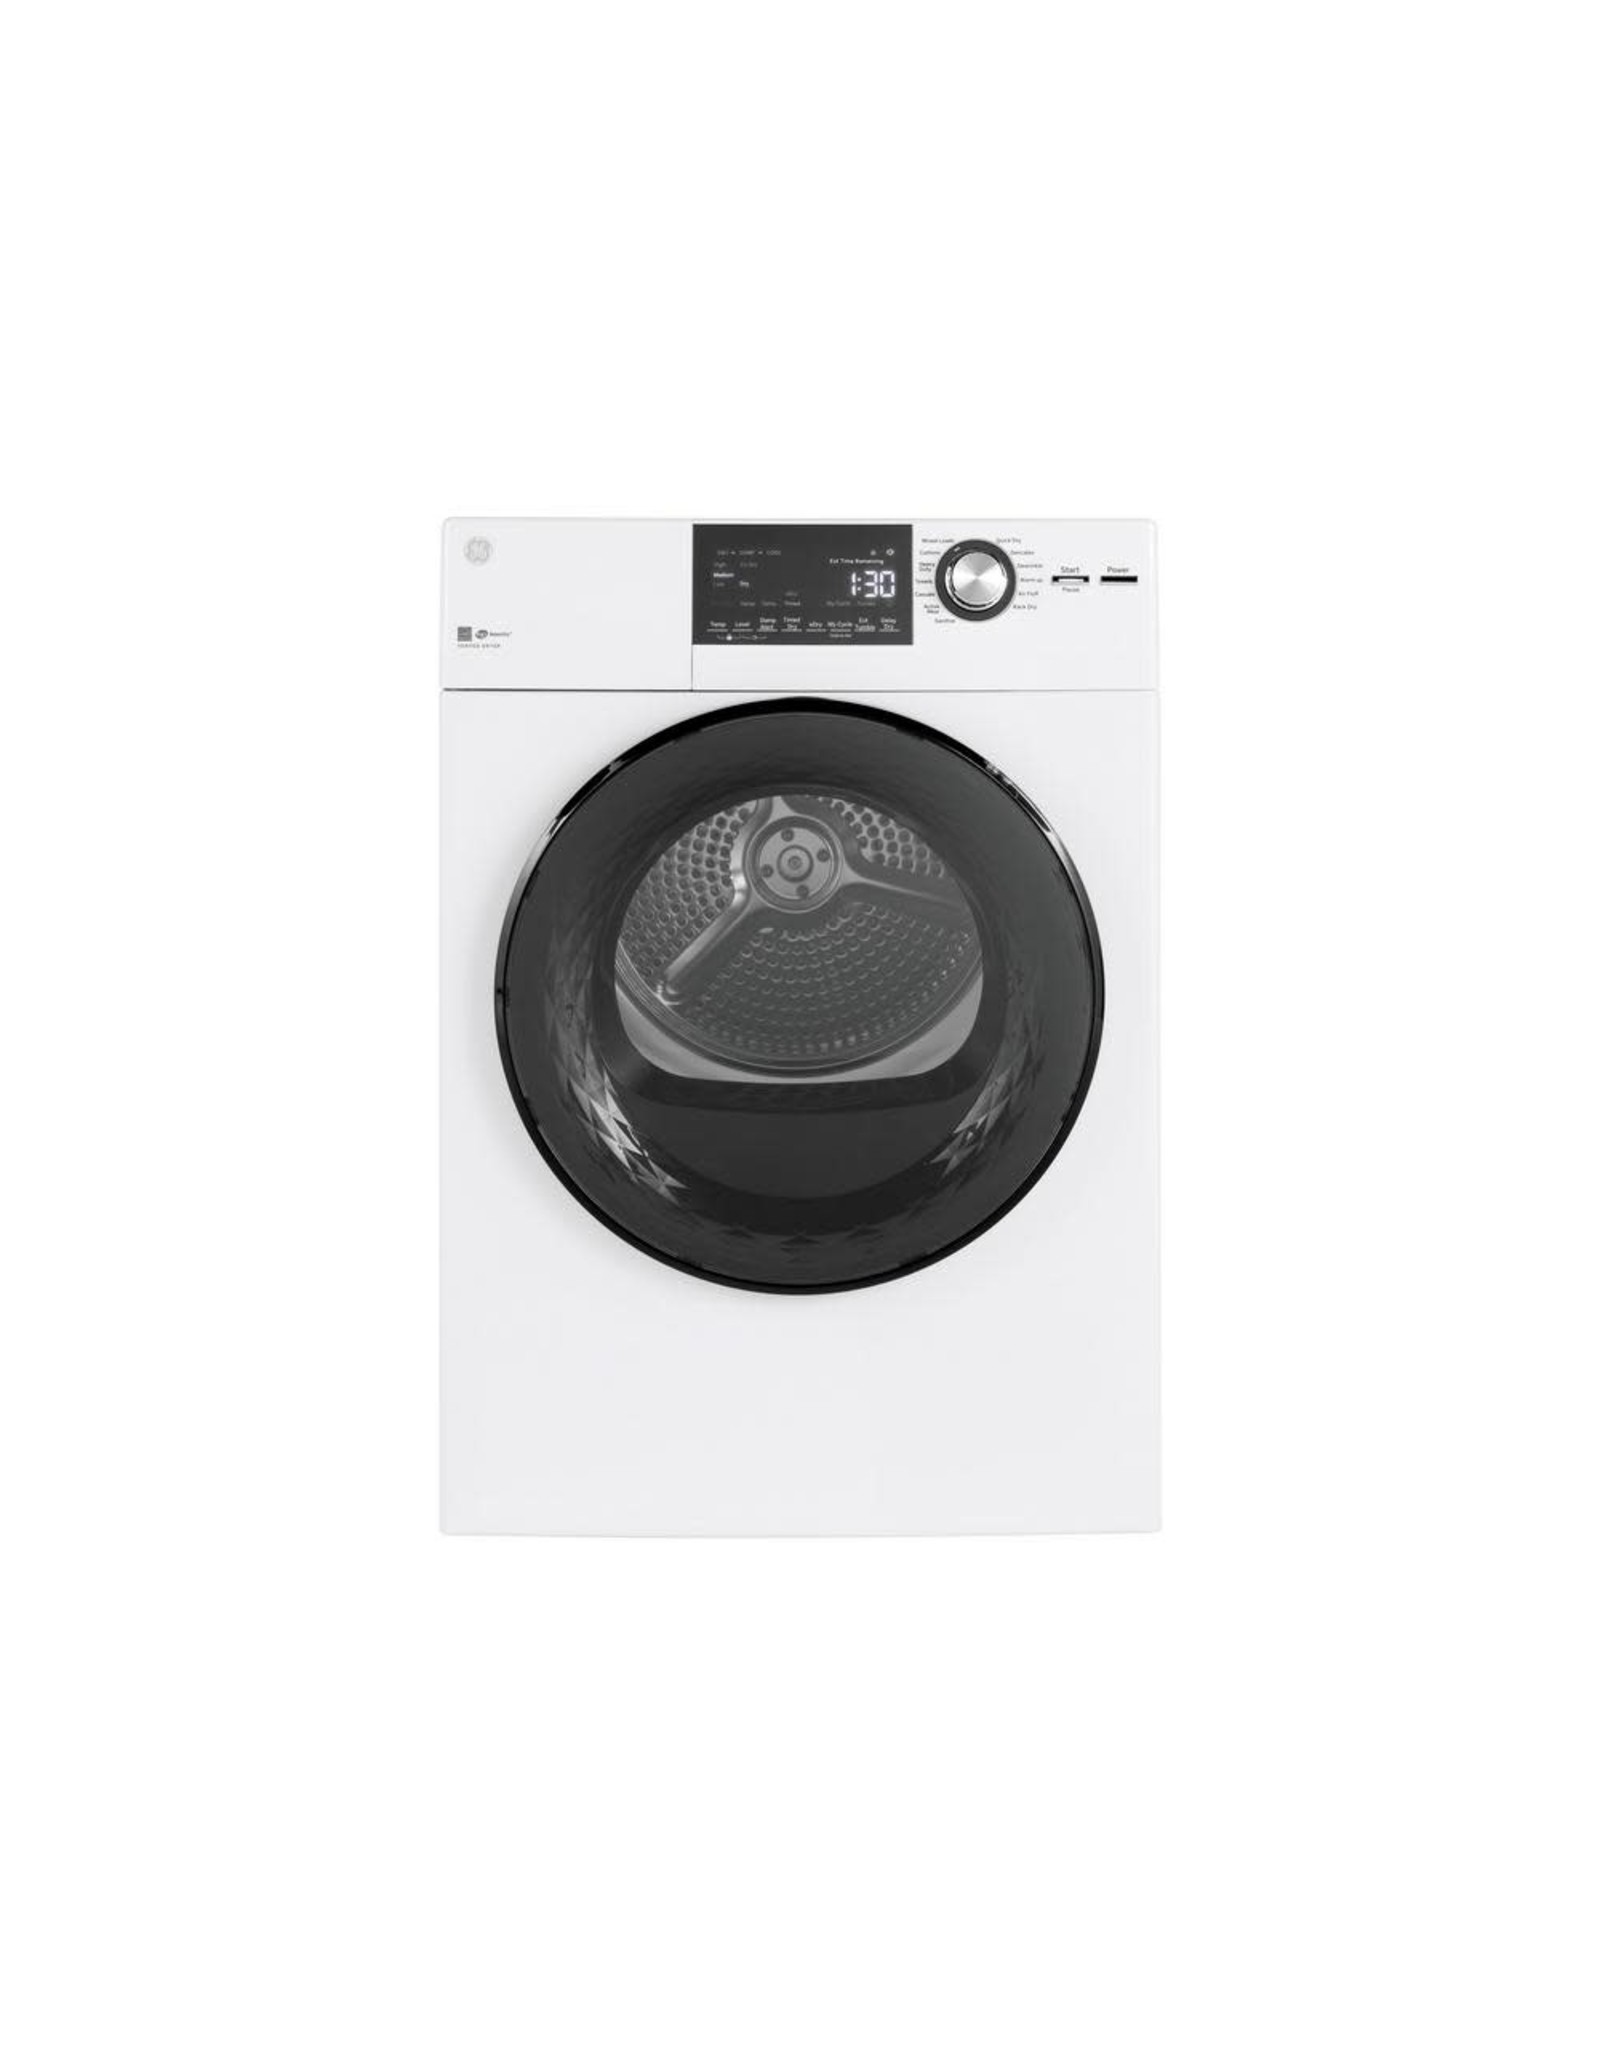 GFD14ESSN2W GE 4.3 cu. ft. 240 Volt White Electric Dryer with Stainless Steel Basket, ENERGY STAR